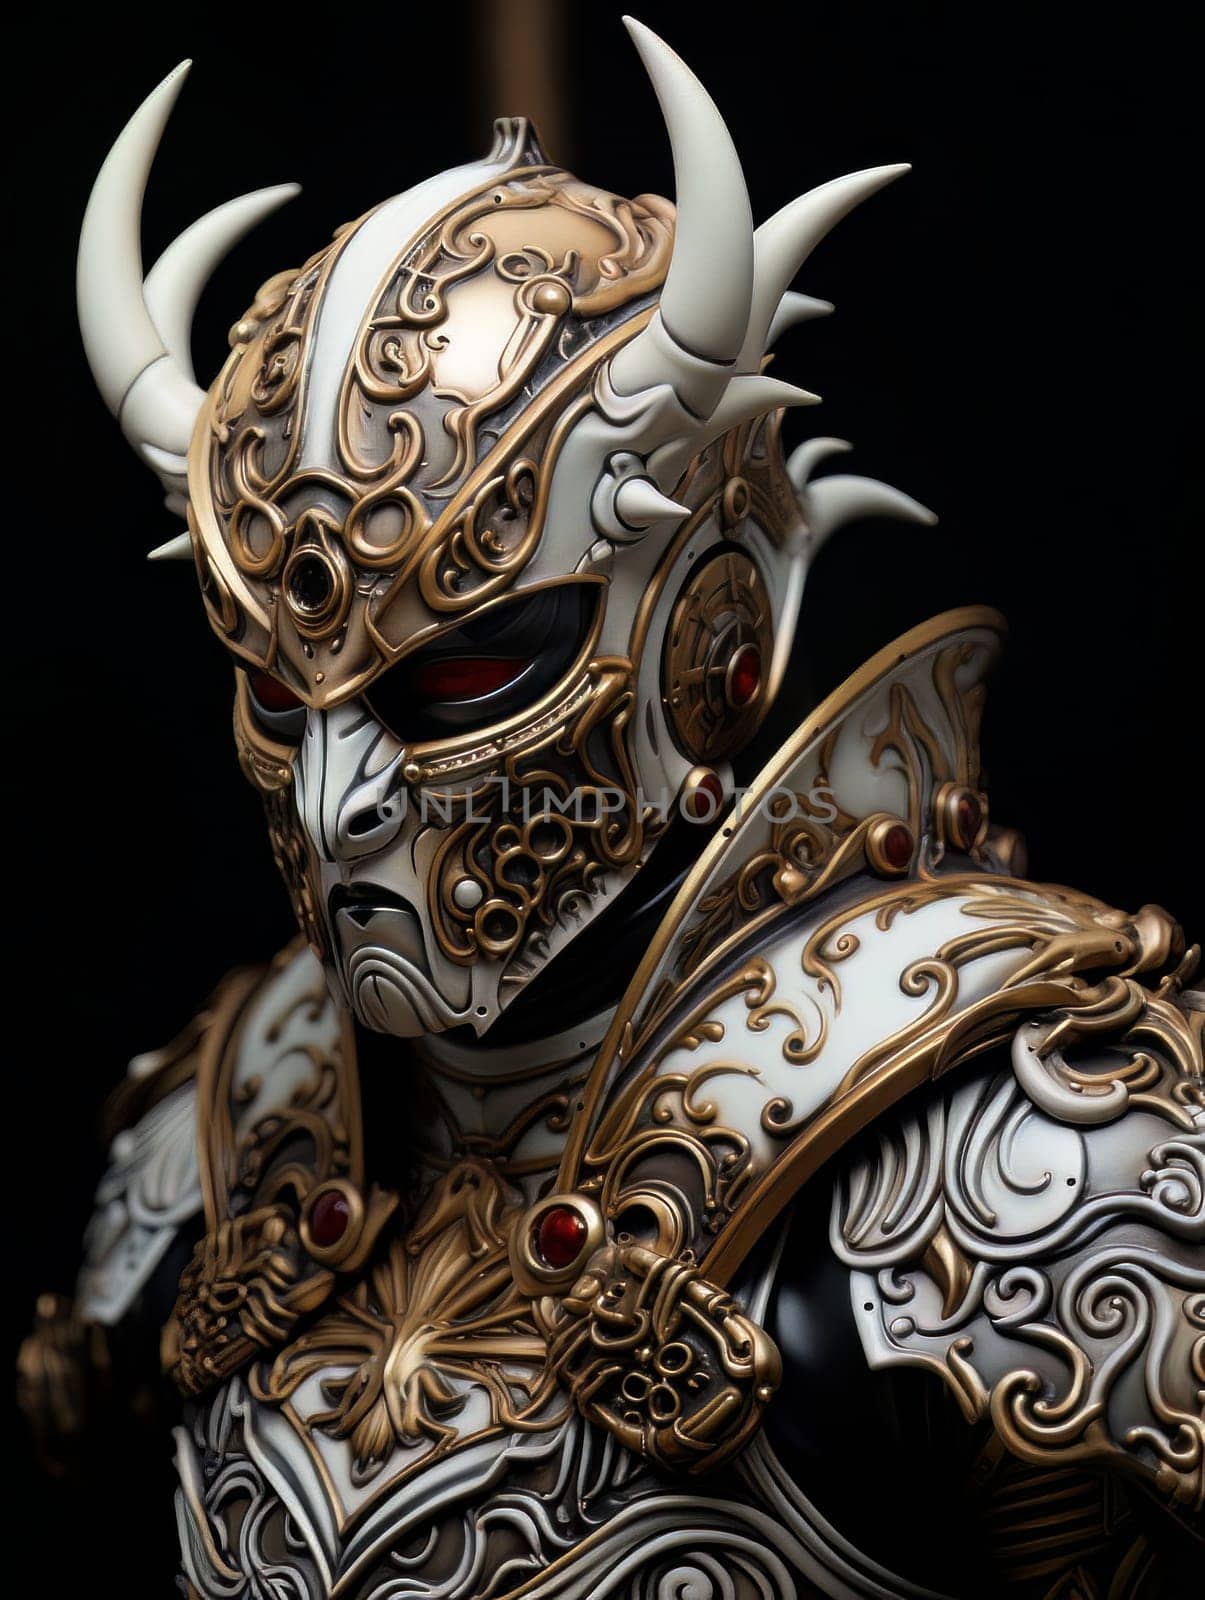 Epic knight in fantasy style in mask and armor with golden patterns. AI by but_photo